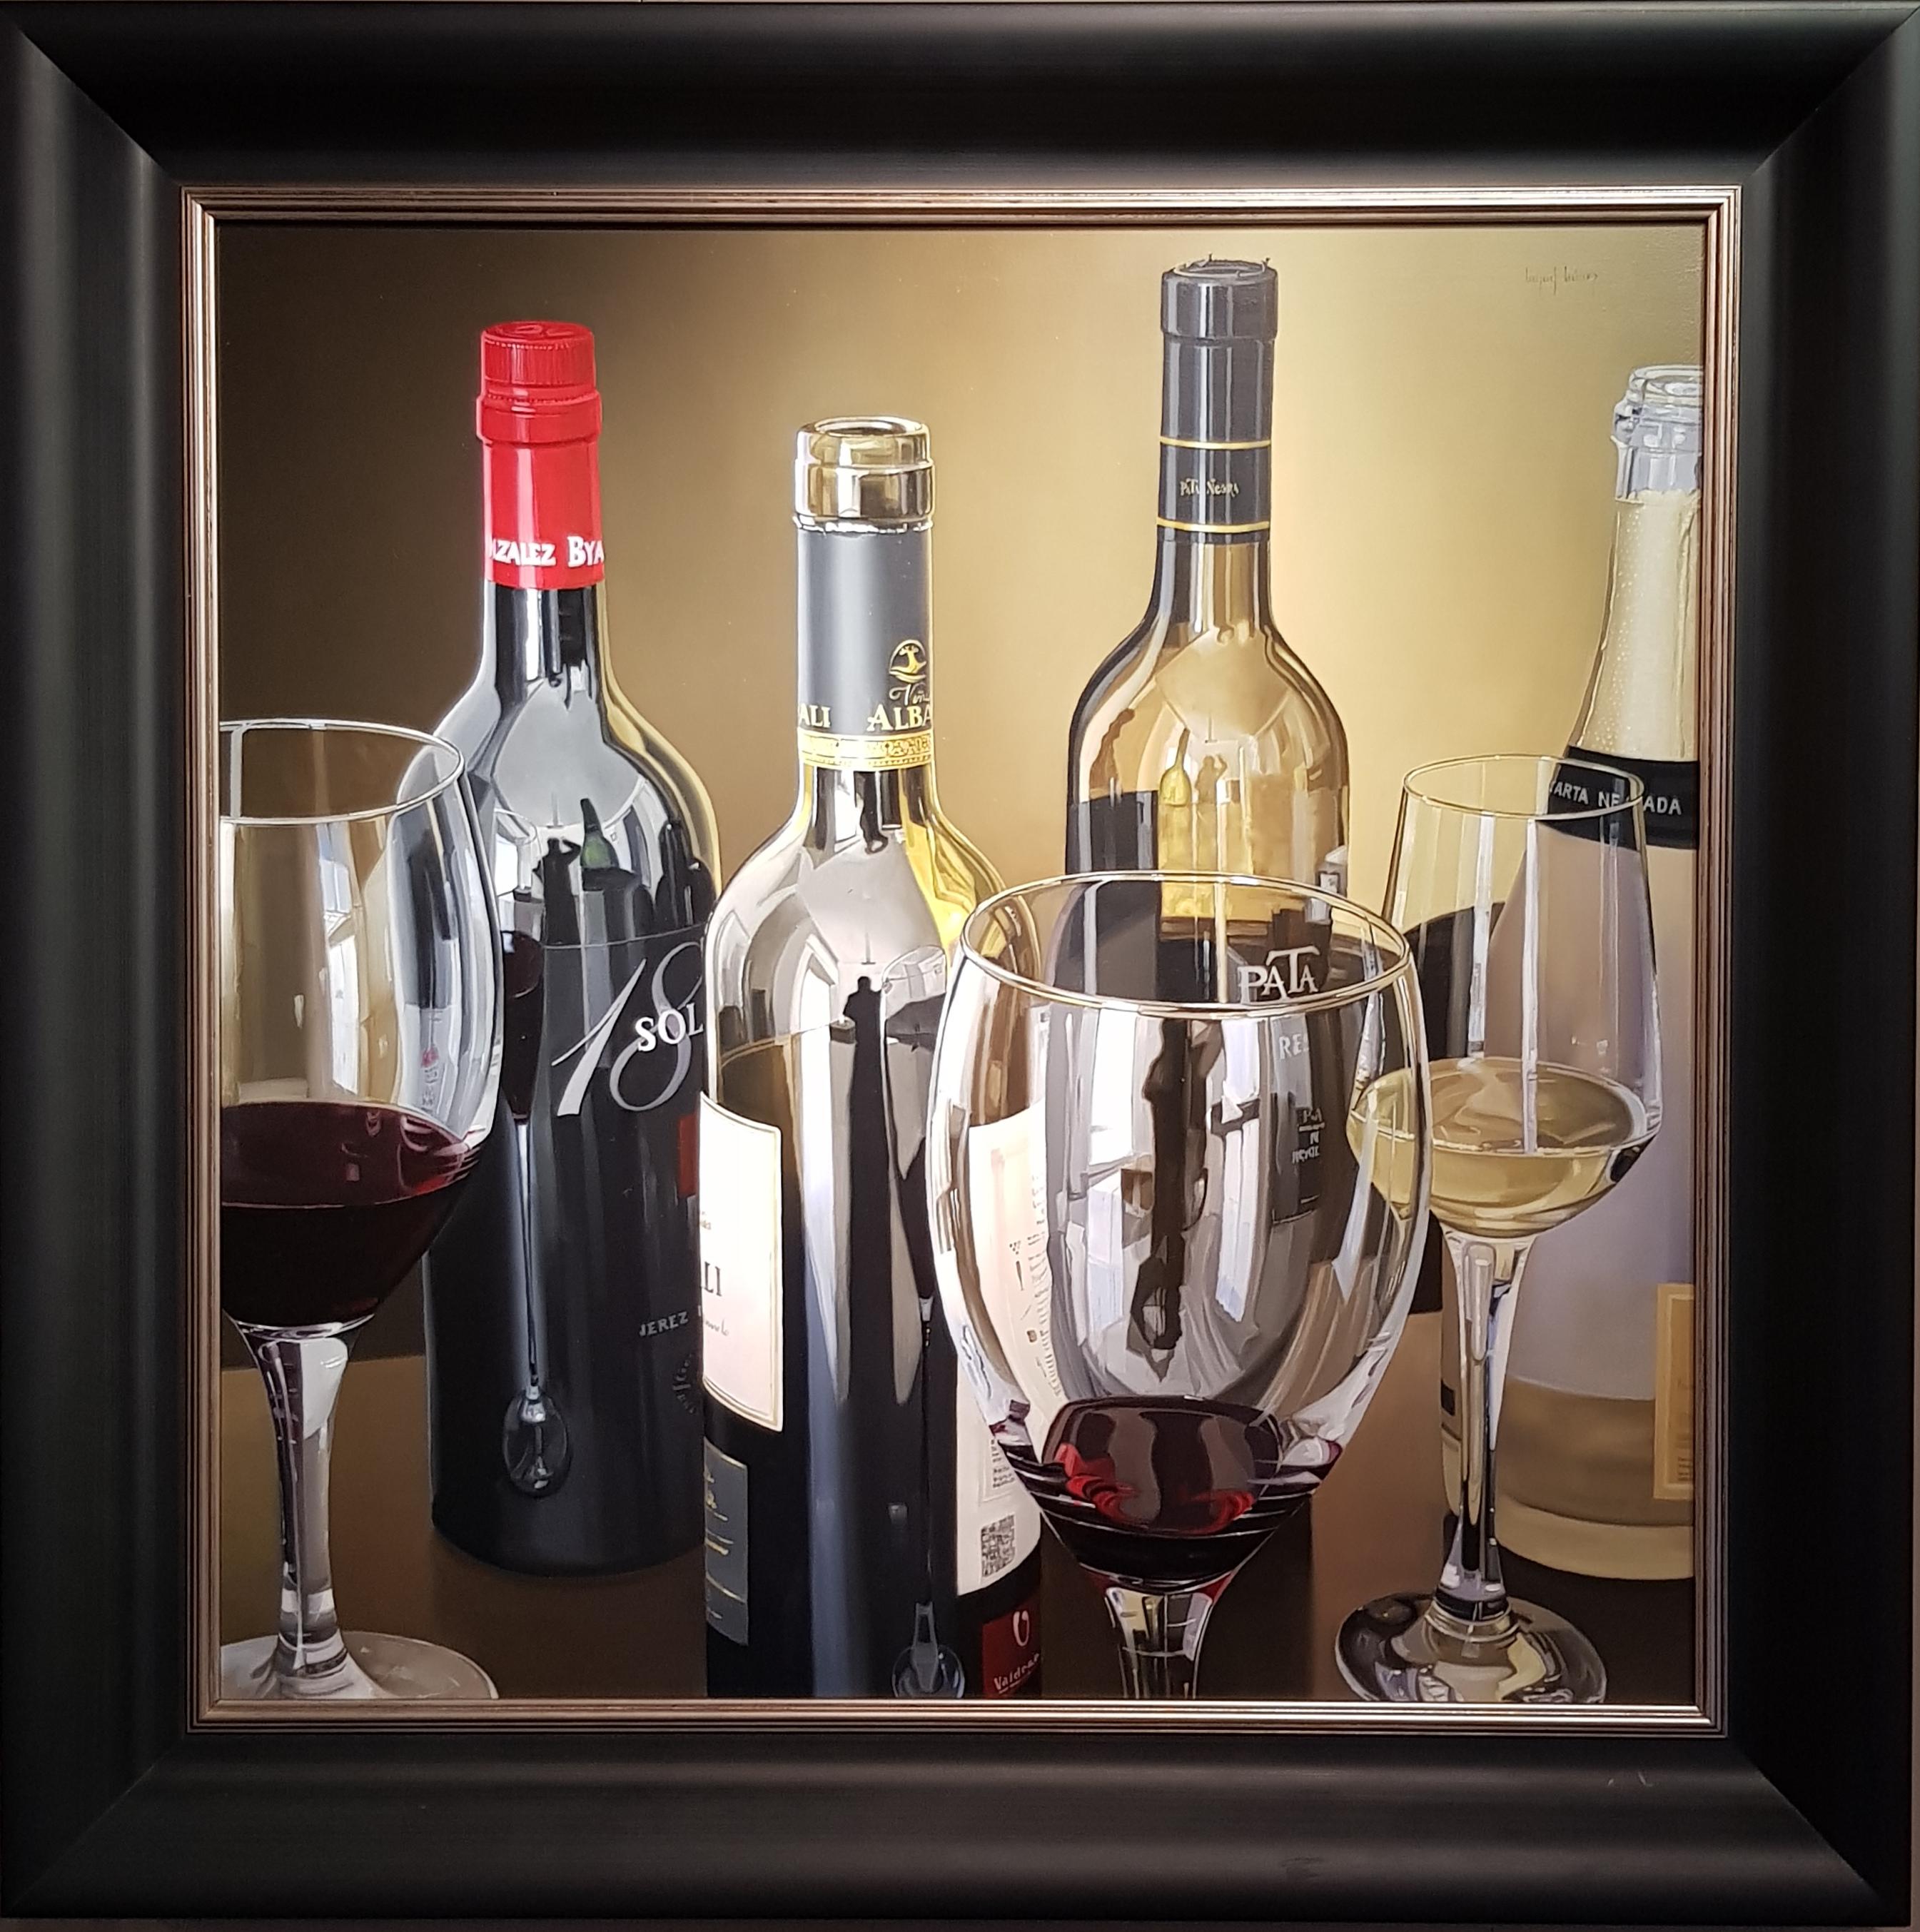 Contemporary Photorealist Painting 'Wine Reflections' by Miguel Angel Nunez - Photograph by Miguel Angel Nuñez